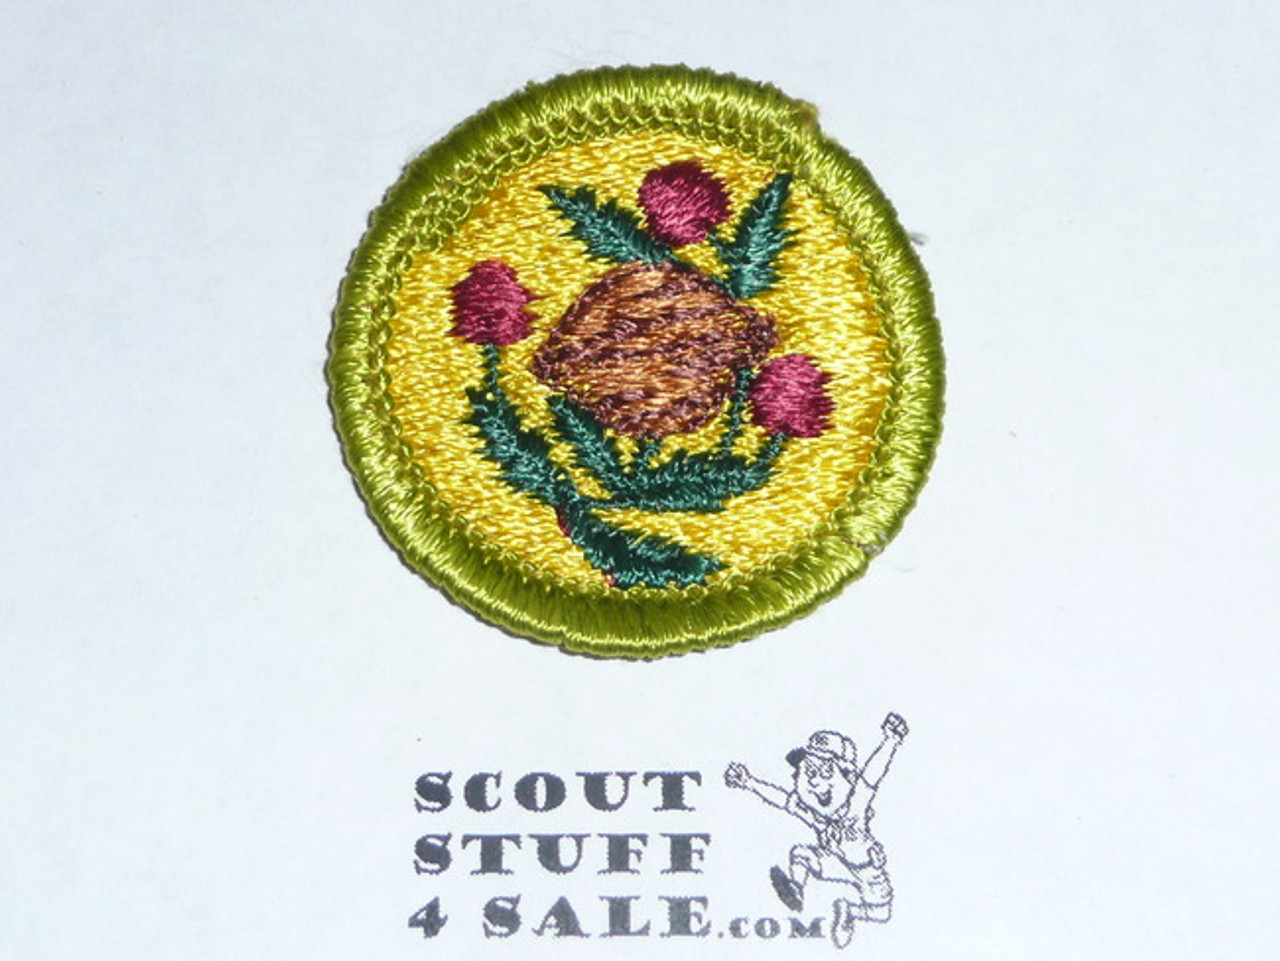 Fruit and Nut Growing - Type G - Fully Embroidered Cloth Back Merit Badge (1961-1971)